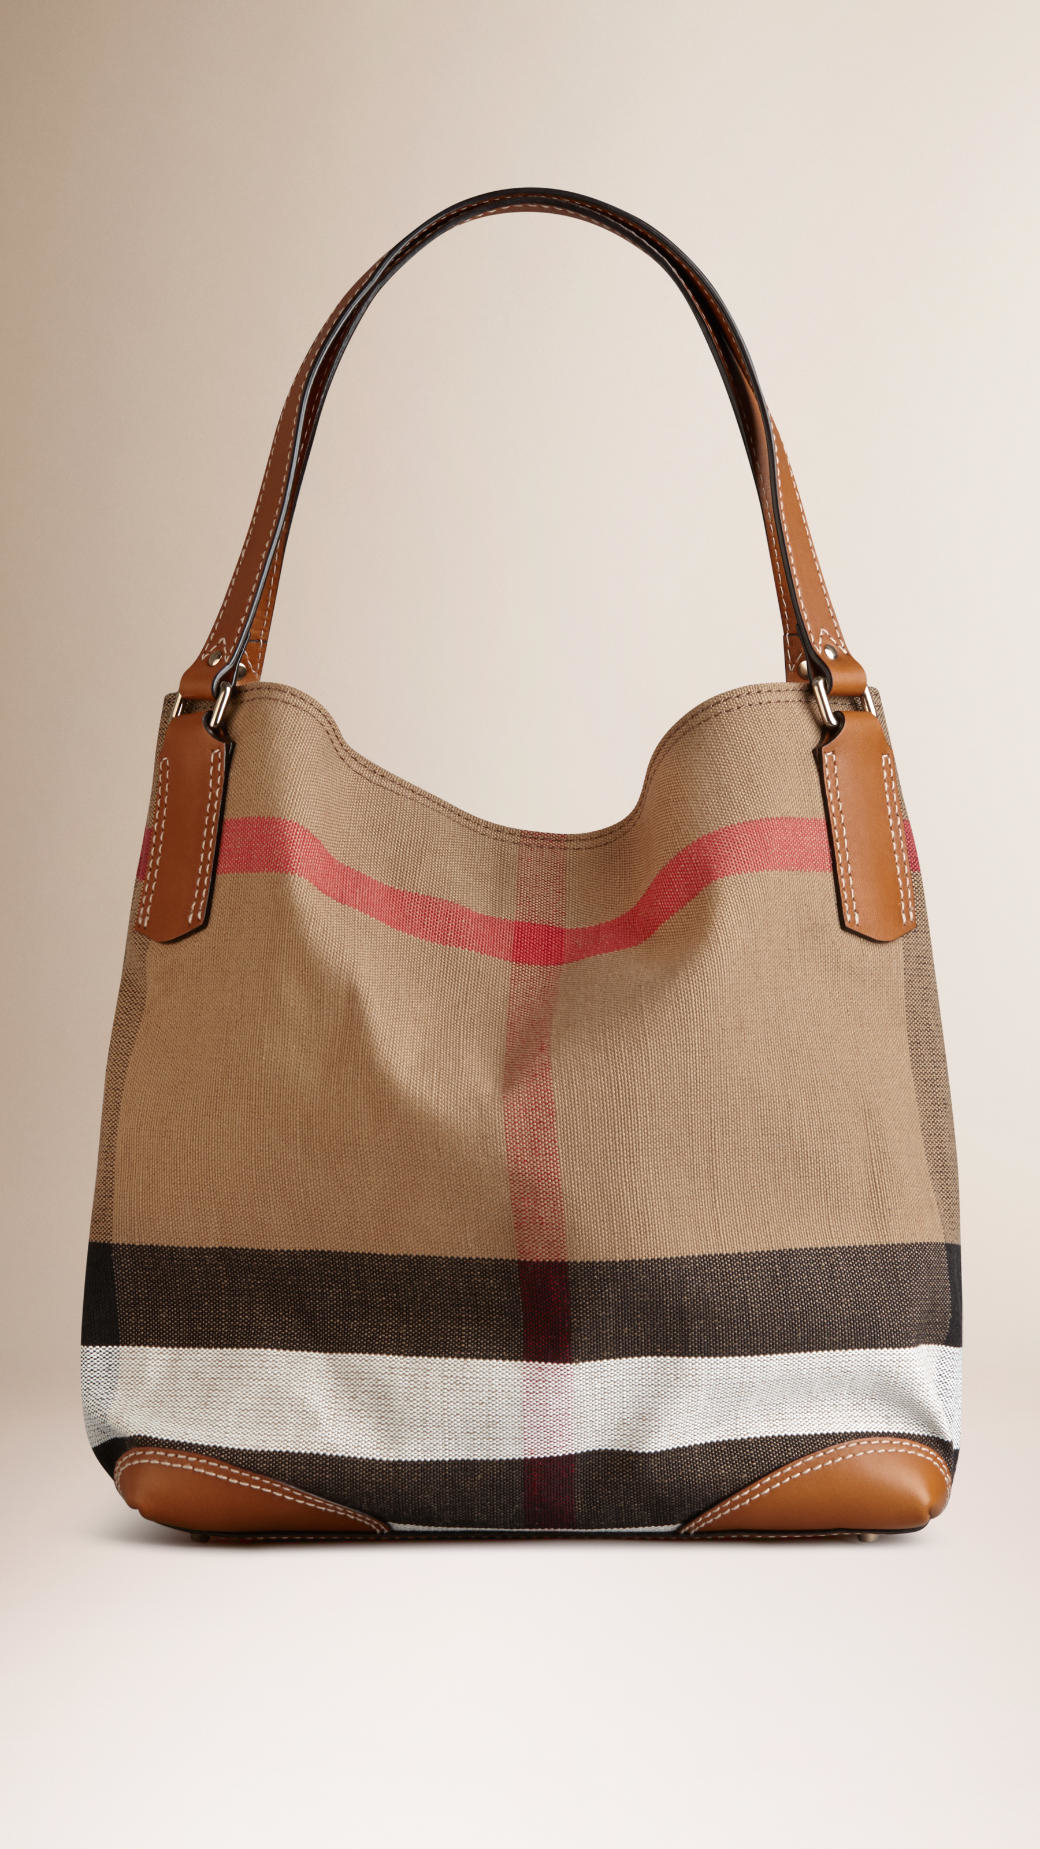 Burberry Medium Canvas Check Tote Bag in Brown - Lyst